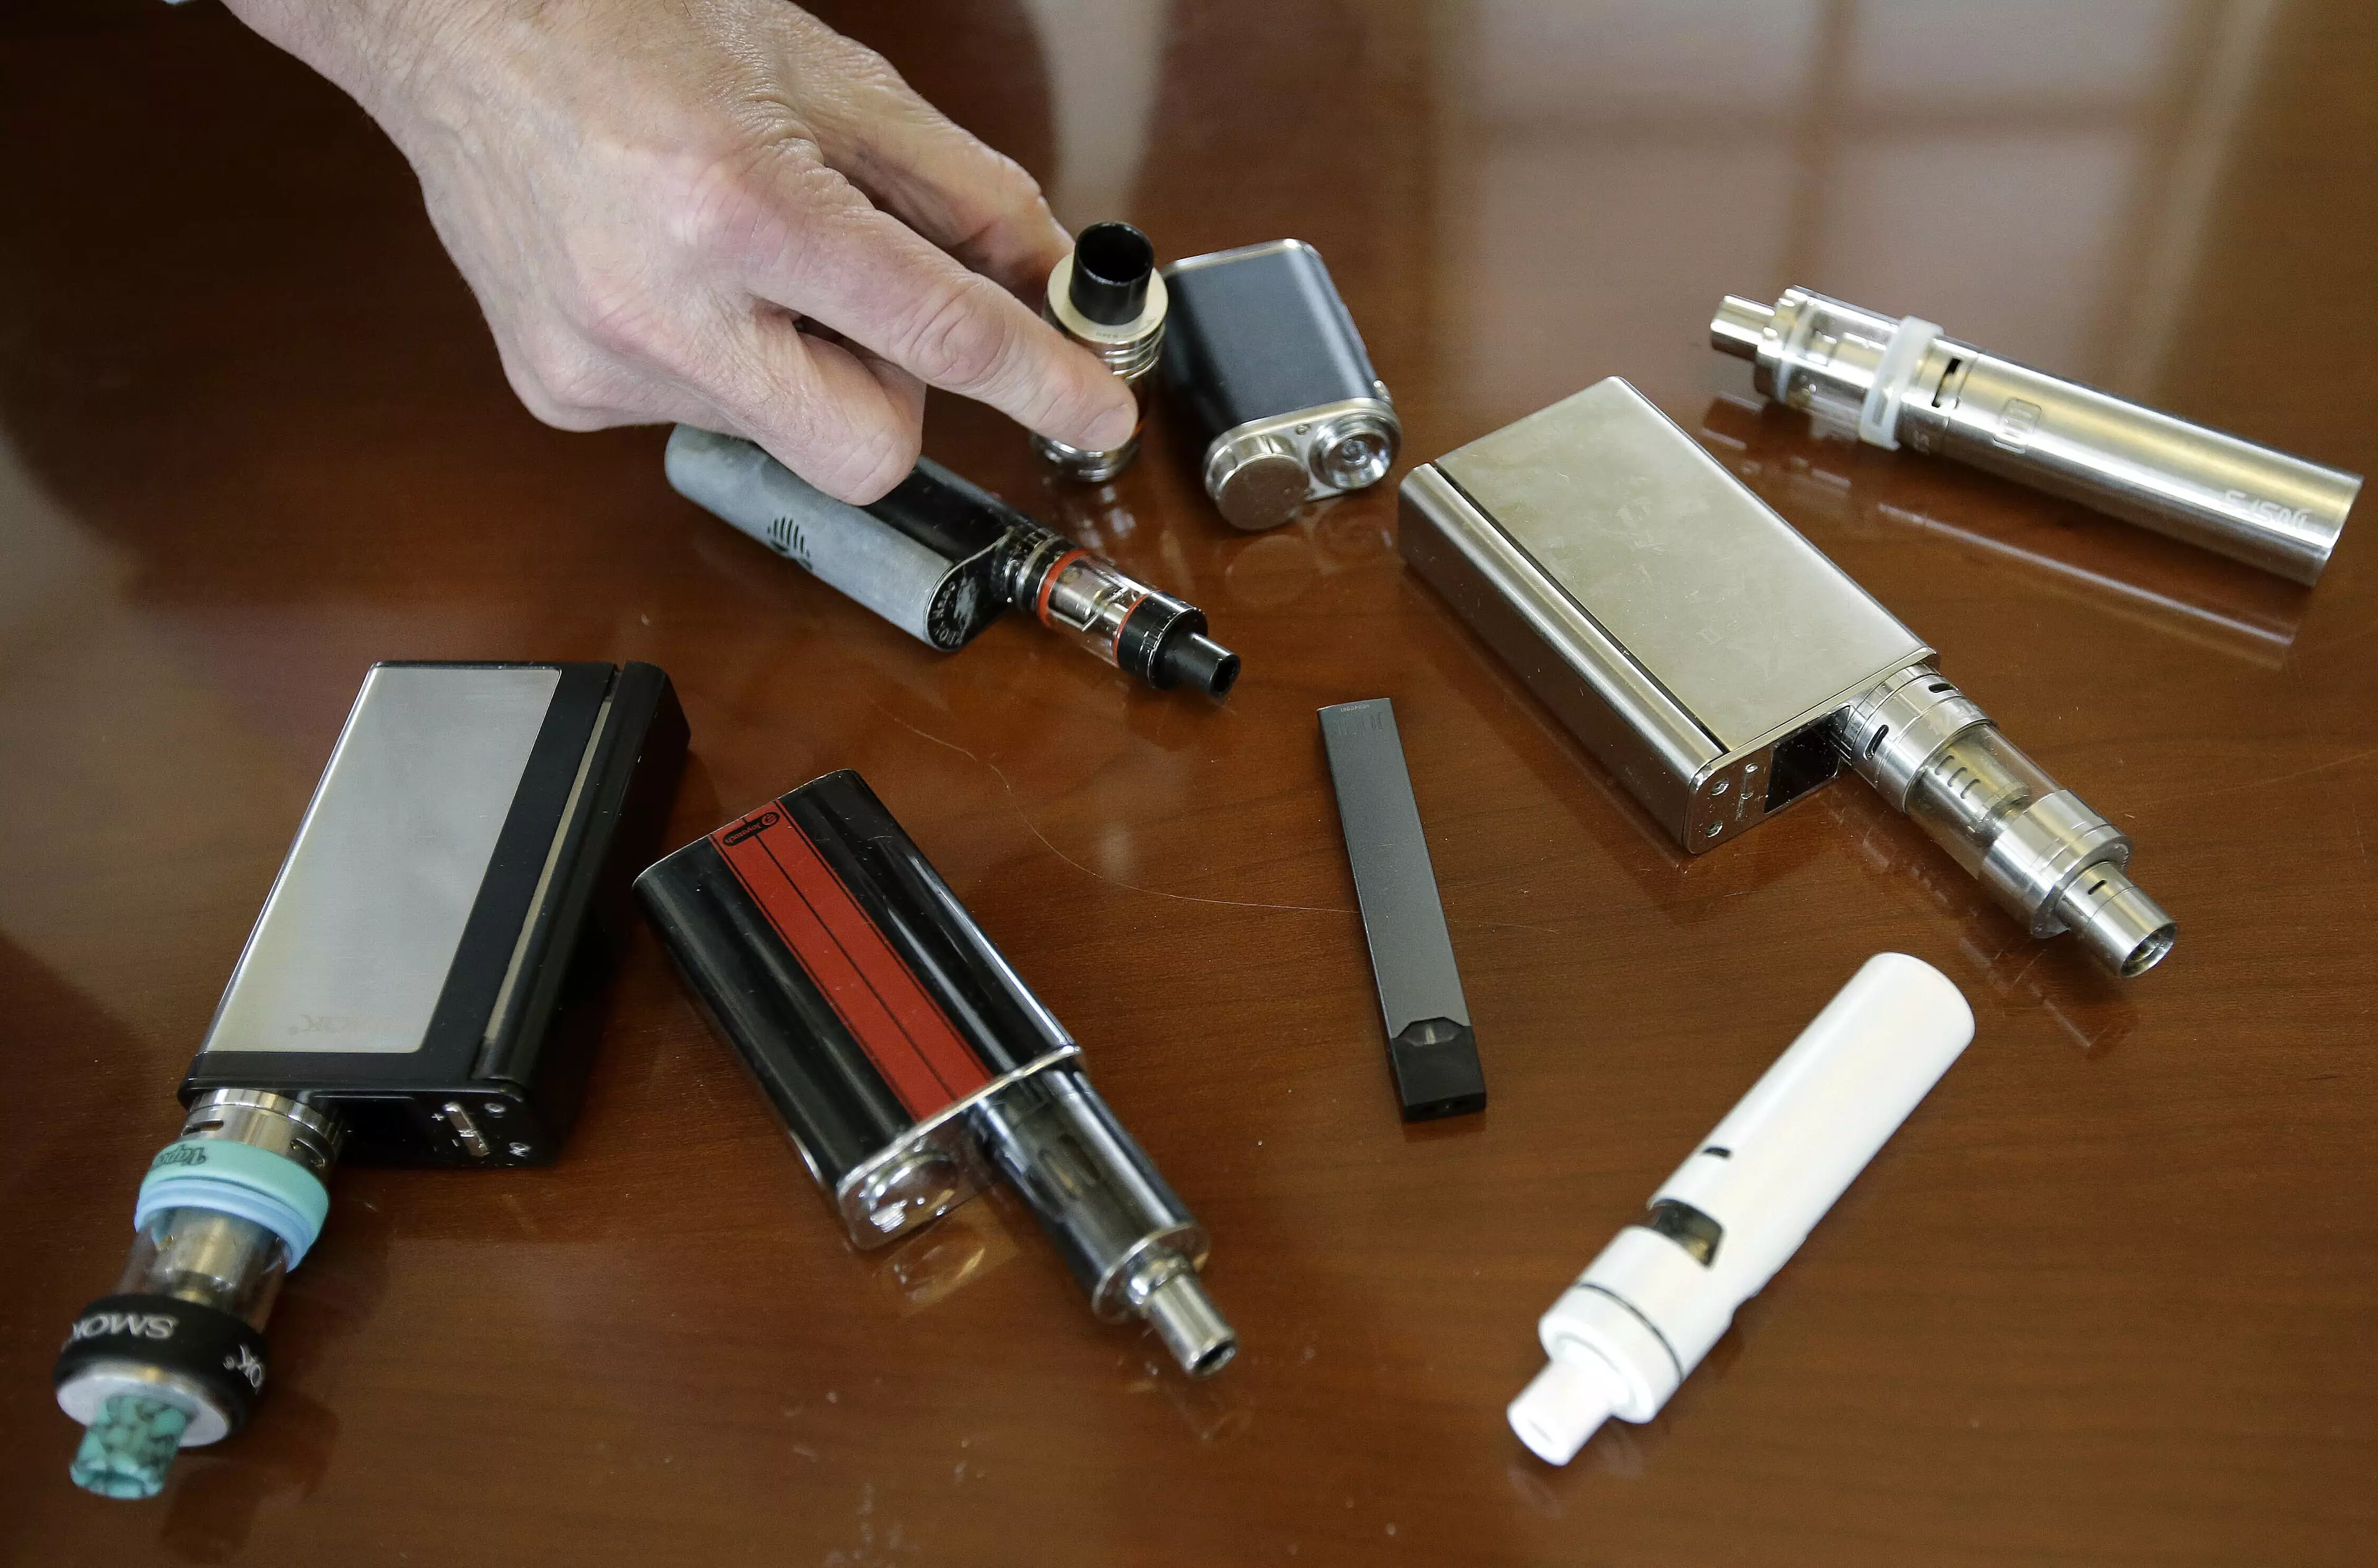 Authorities are investigating a number of cases thought to be related to vaping in the US.